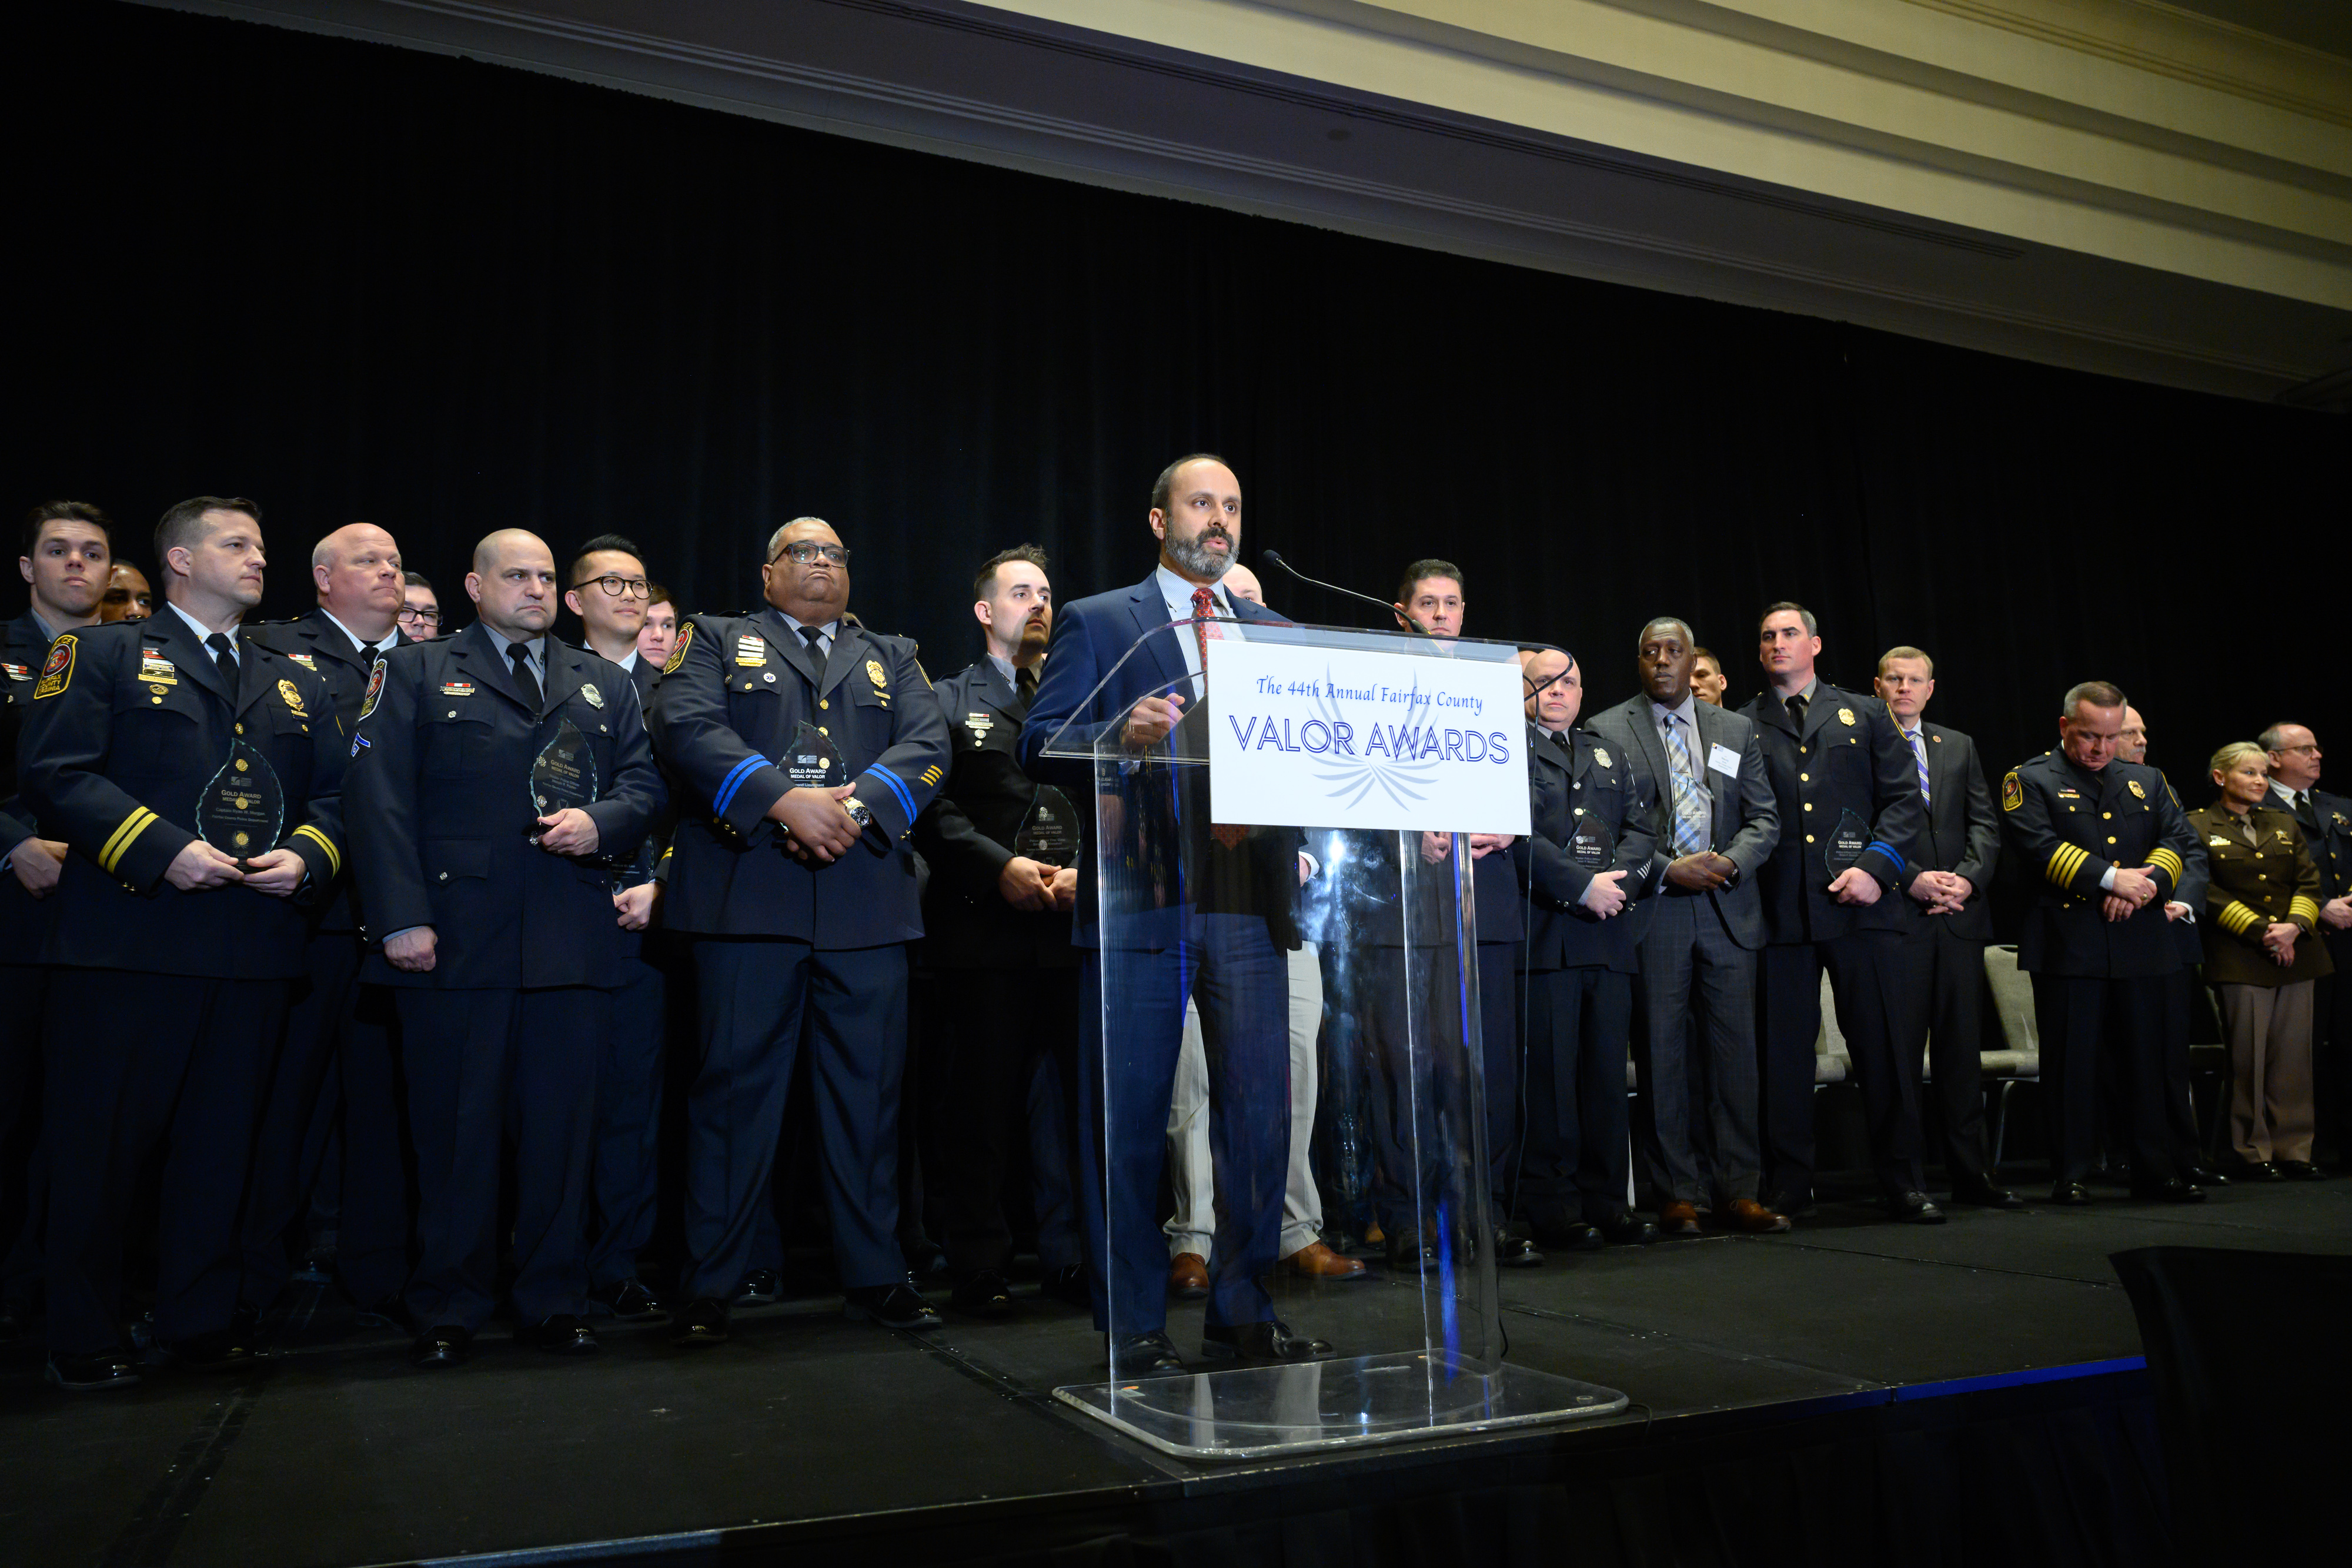 Greater Reston Chamber of Commerce Hosts 44th Annual Fairfax County Valor Awards